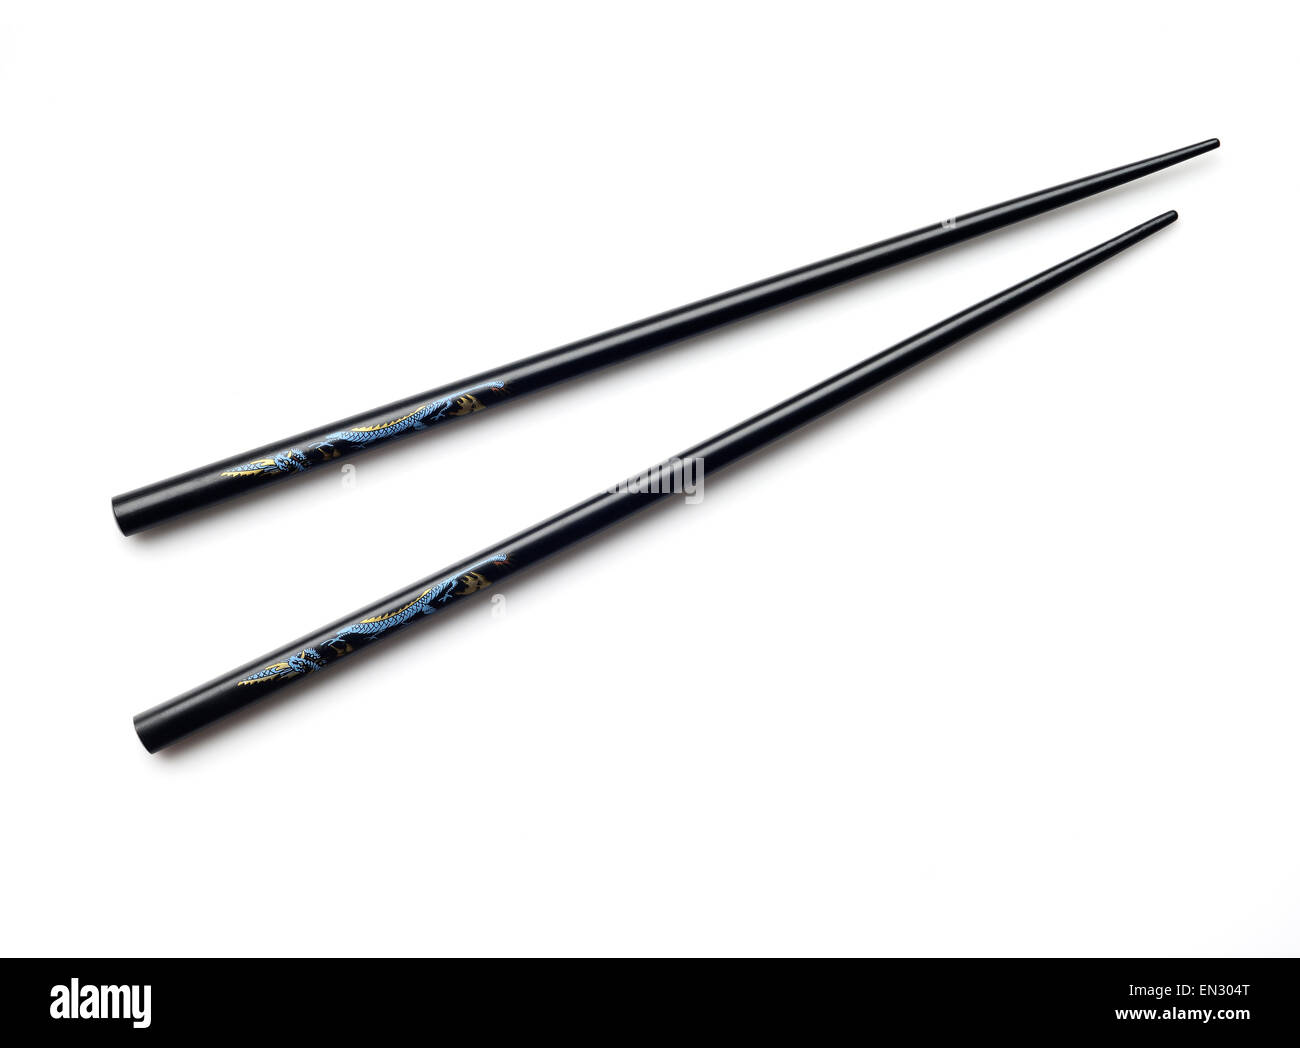 High resolution image of black wooden chopsticks with blue and yellow dragon. Stock Photo